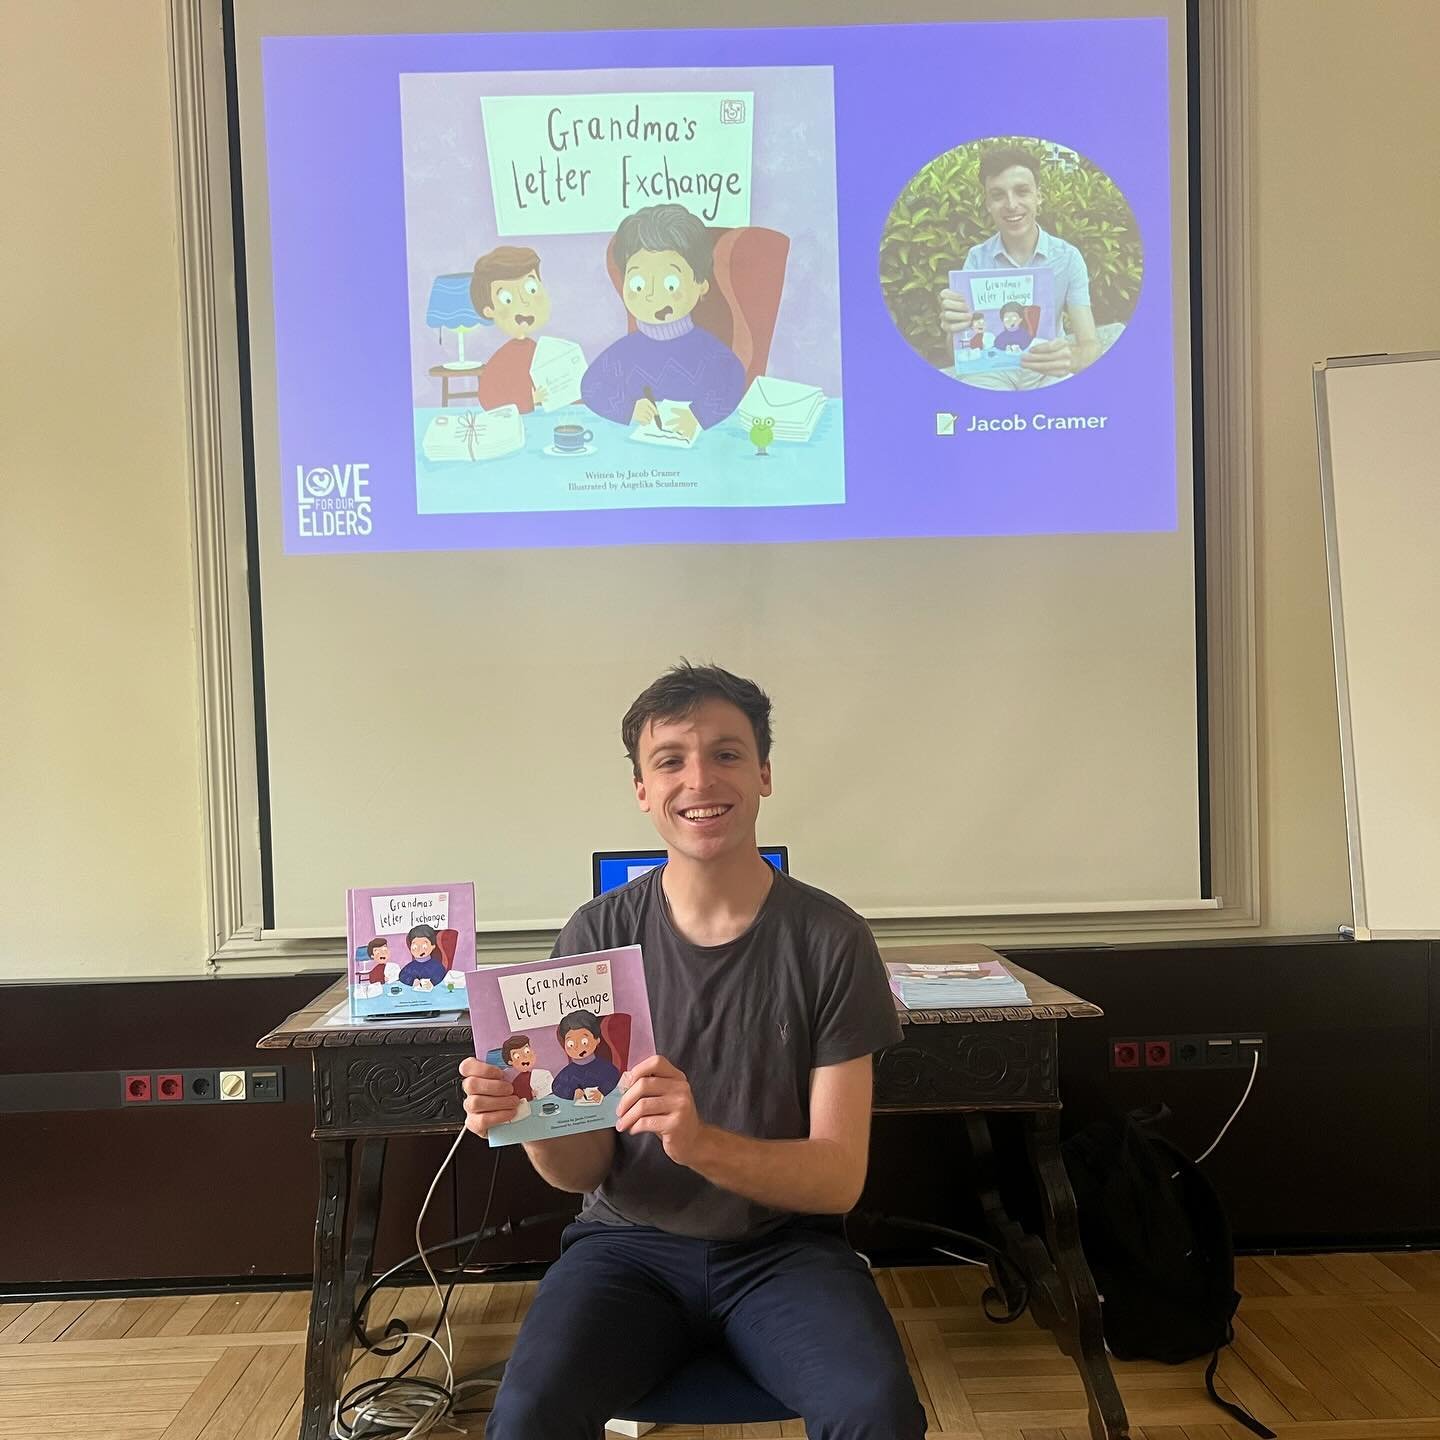 Today was my first ever book read aloud &amp; signing of Grandma&rsquo;s Letter Exchange! Thank you to my favorite library @iiemadrid for hosting this event. I surprised myself with how engaging and interactive my storytelling was, and it was amazing